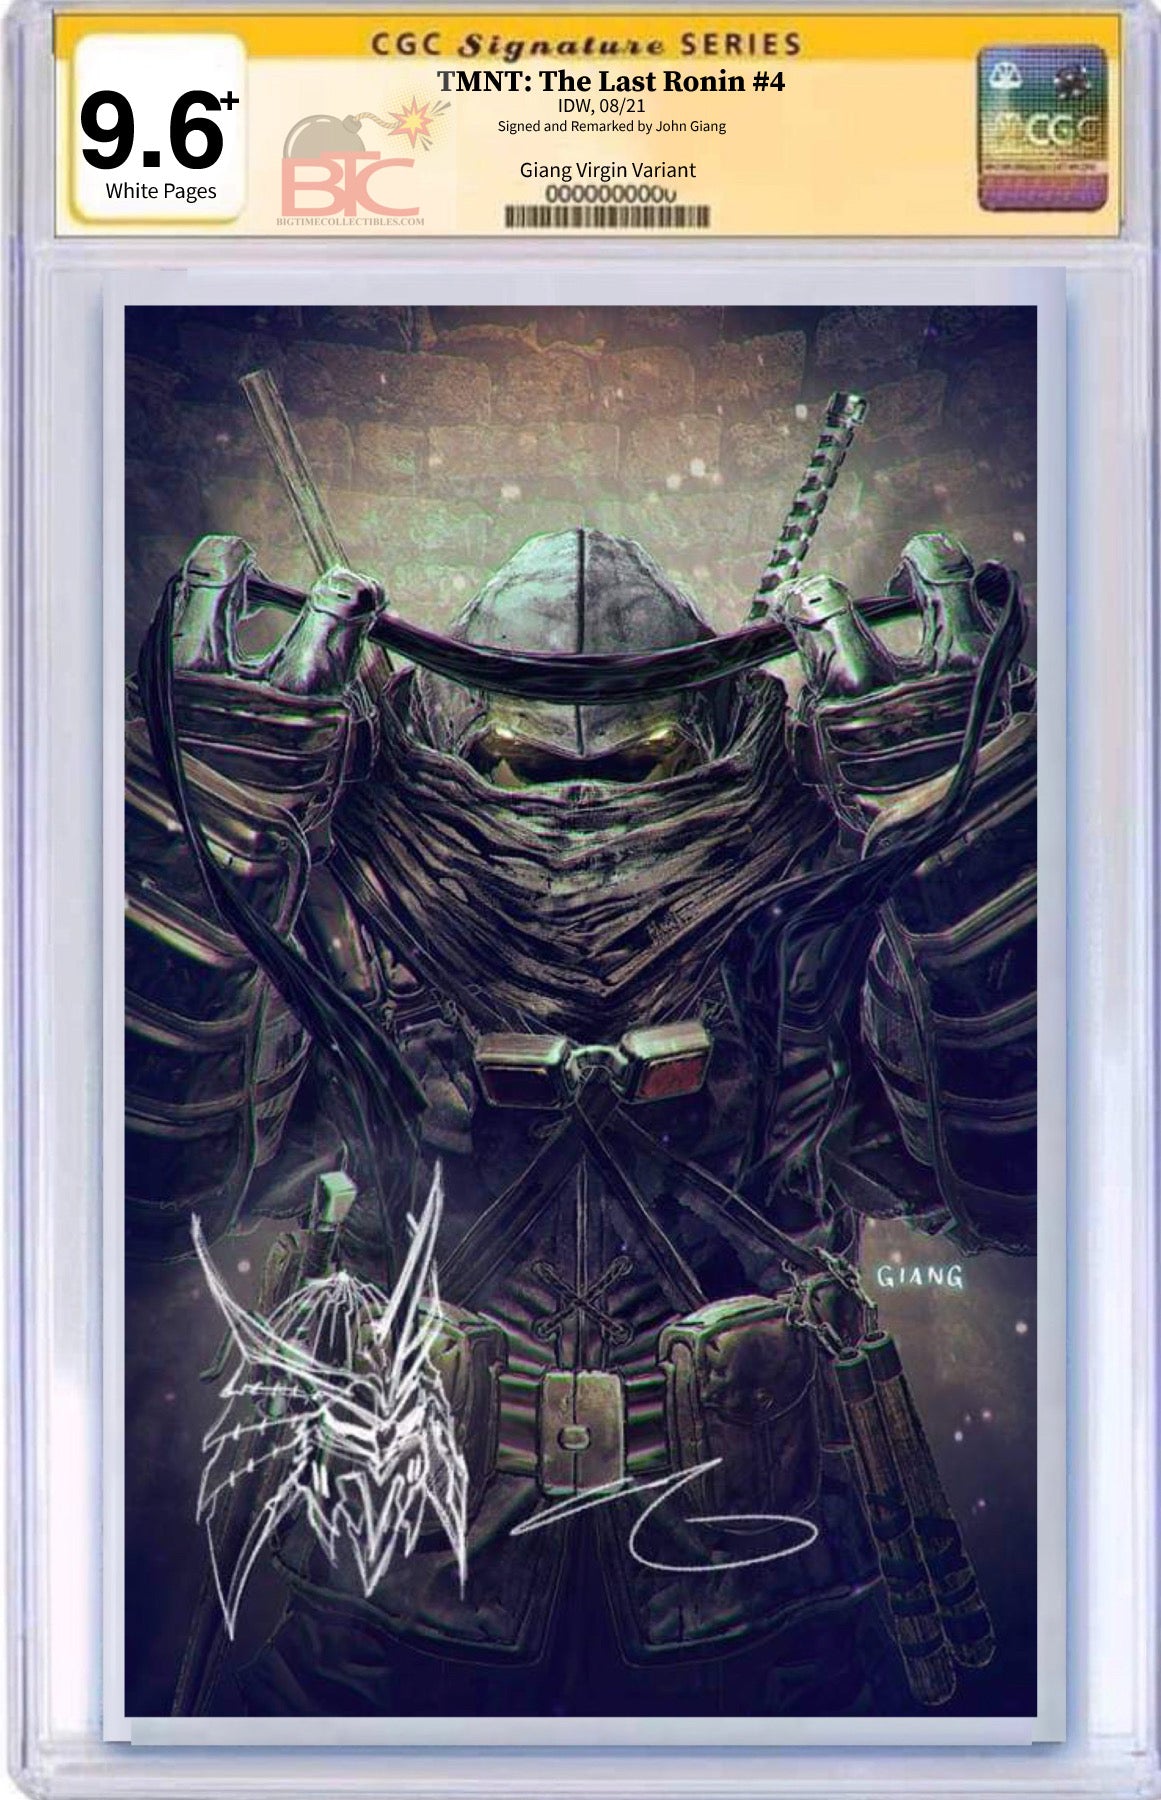 09/22/2021 TMNT THE LAST RONIN #4 JOHN GIANG EXCLUSIVE VARIANT OPTIONS (I2)